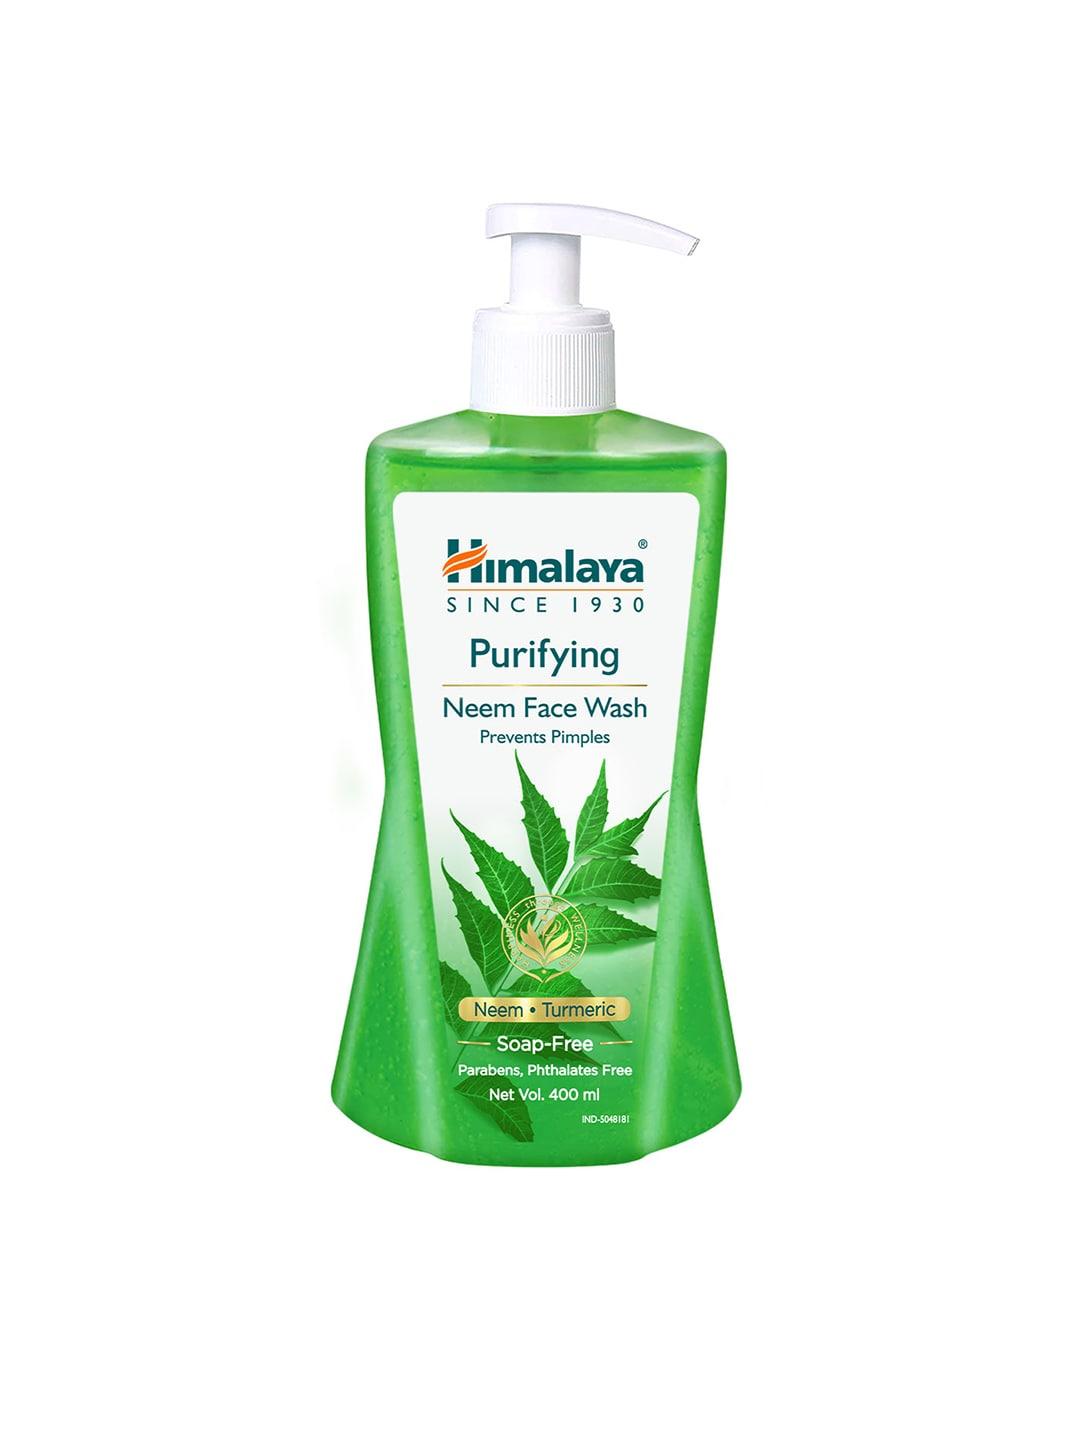 Himalaya Anti-Pimple Purifying Neem Face Wash with Turmeric For All Skin Types - 400 ml